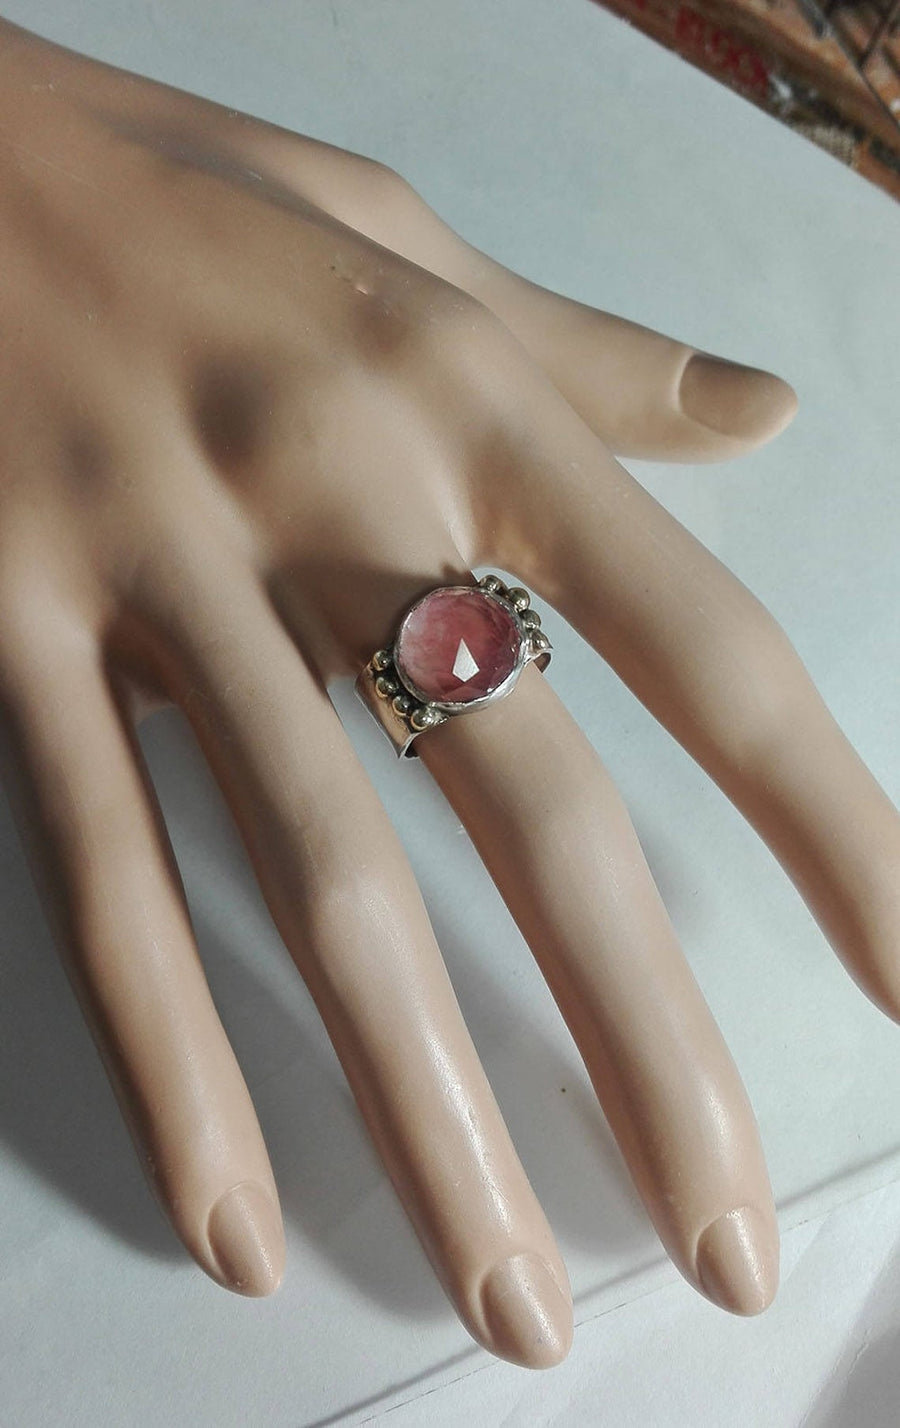 Solid Silver and Gold Pink Stone Ring.